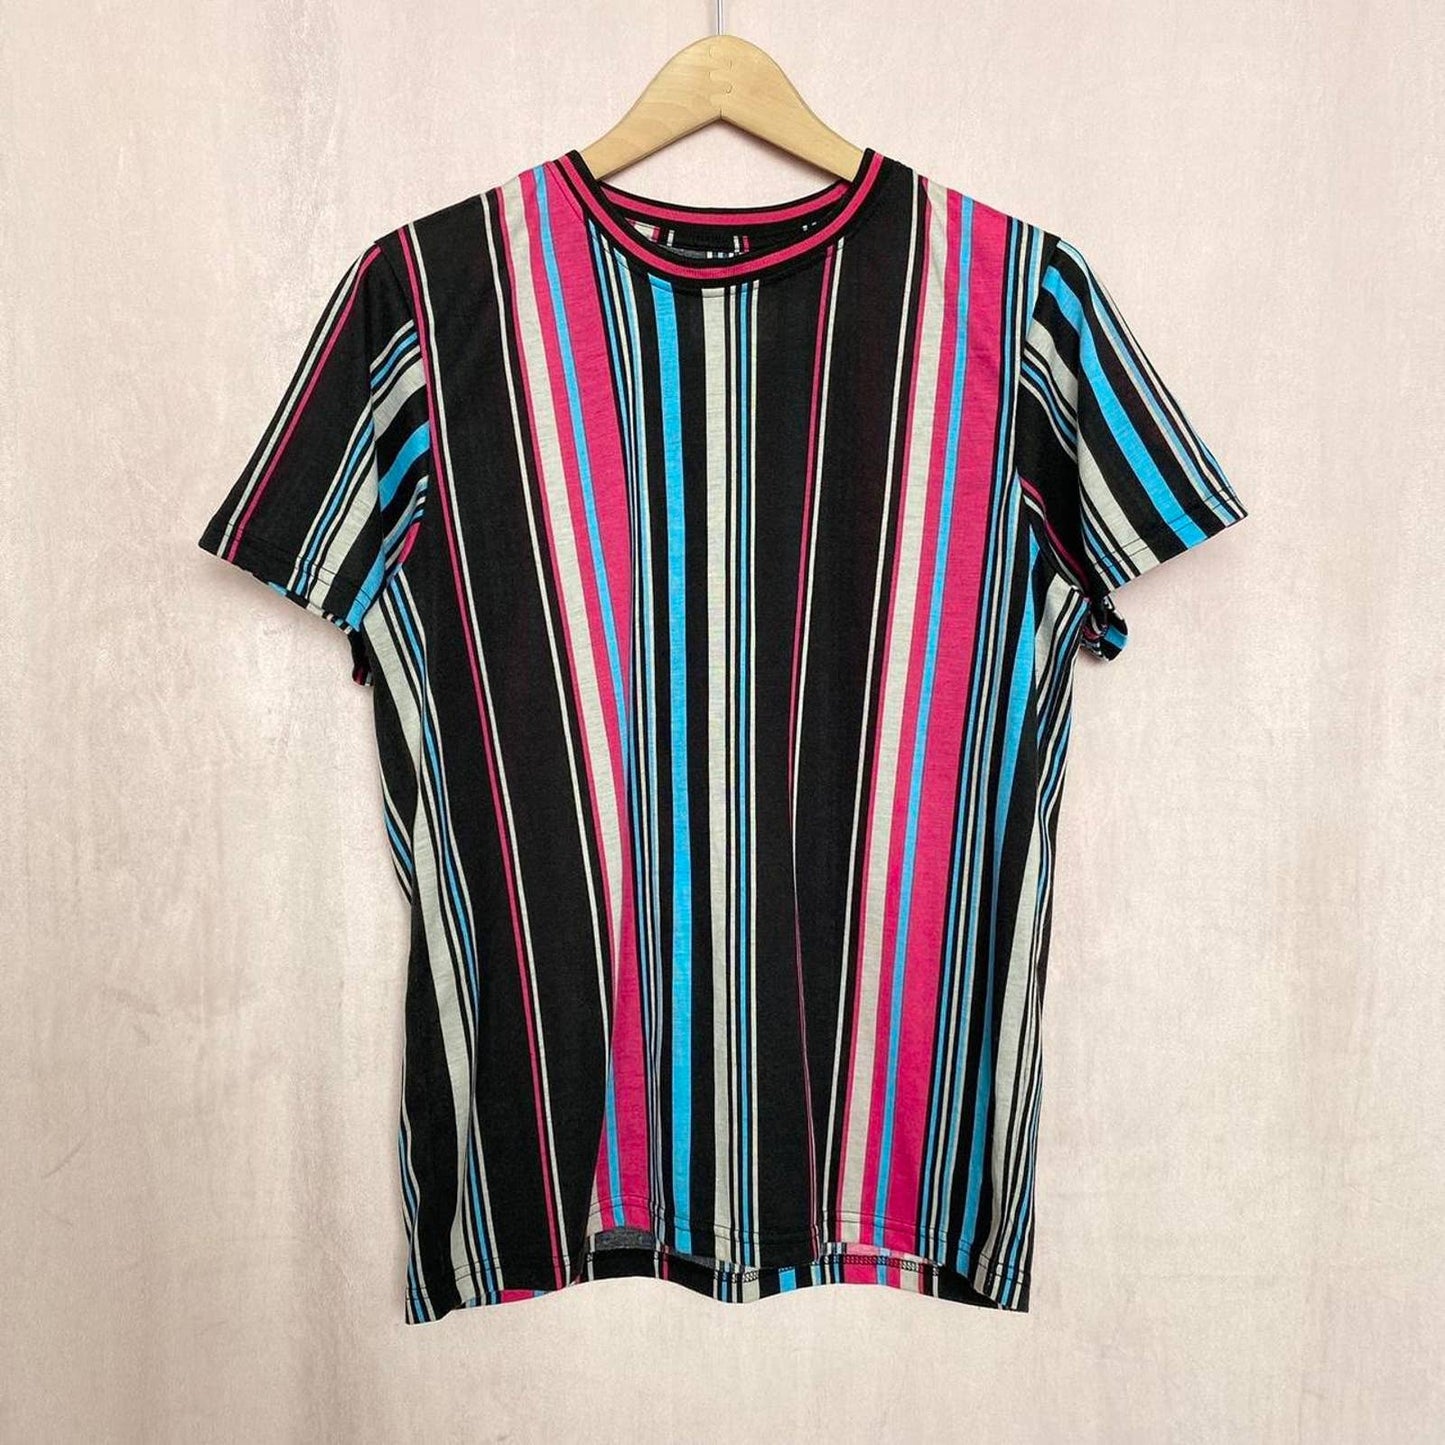 Secondhand Fresh Prints of Bel-Air Colorful Striped Tee, Size Medium